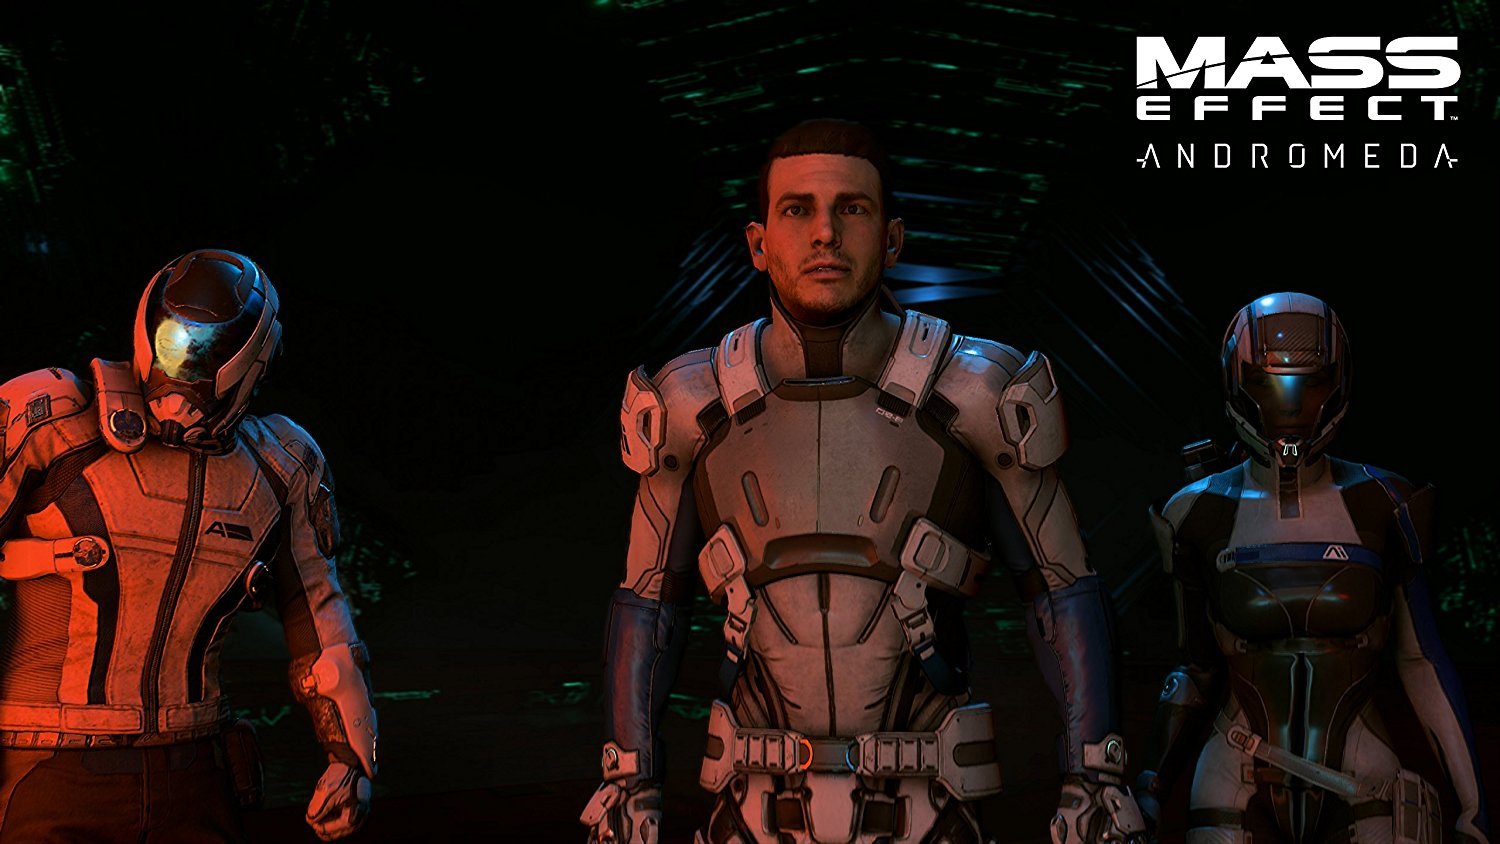 Mass Effect Andromeda characters